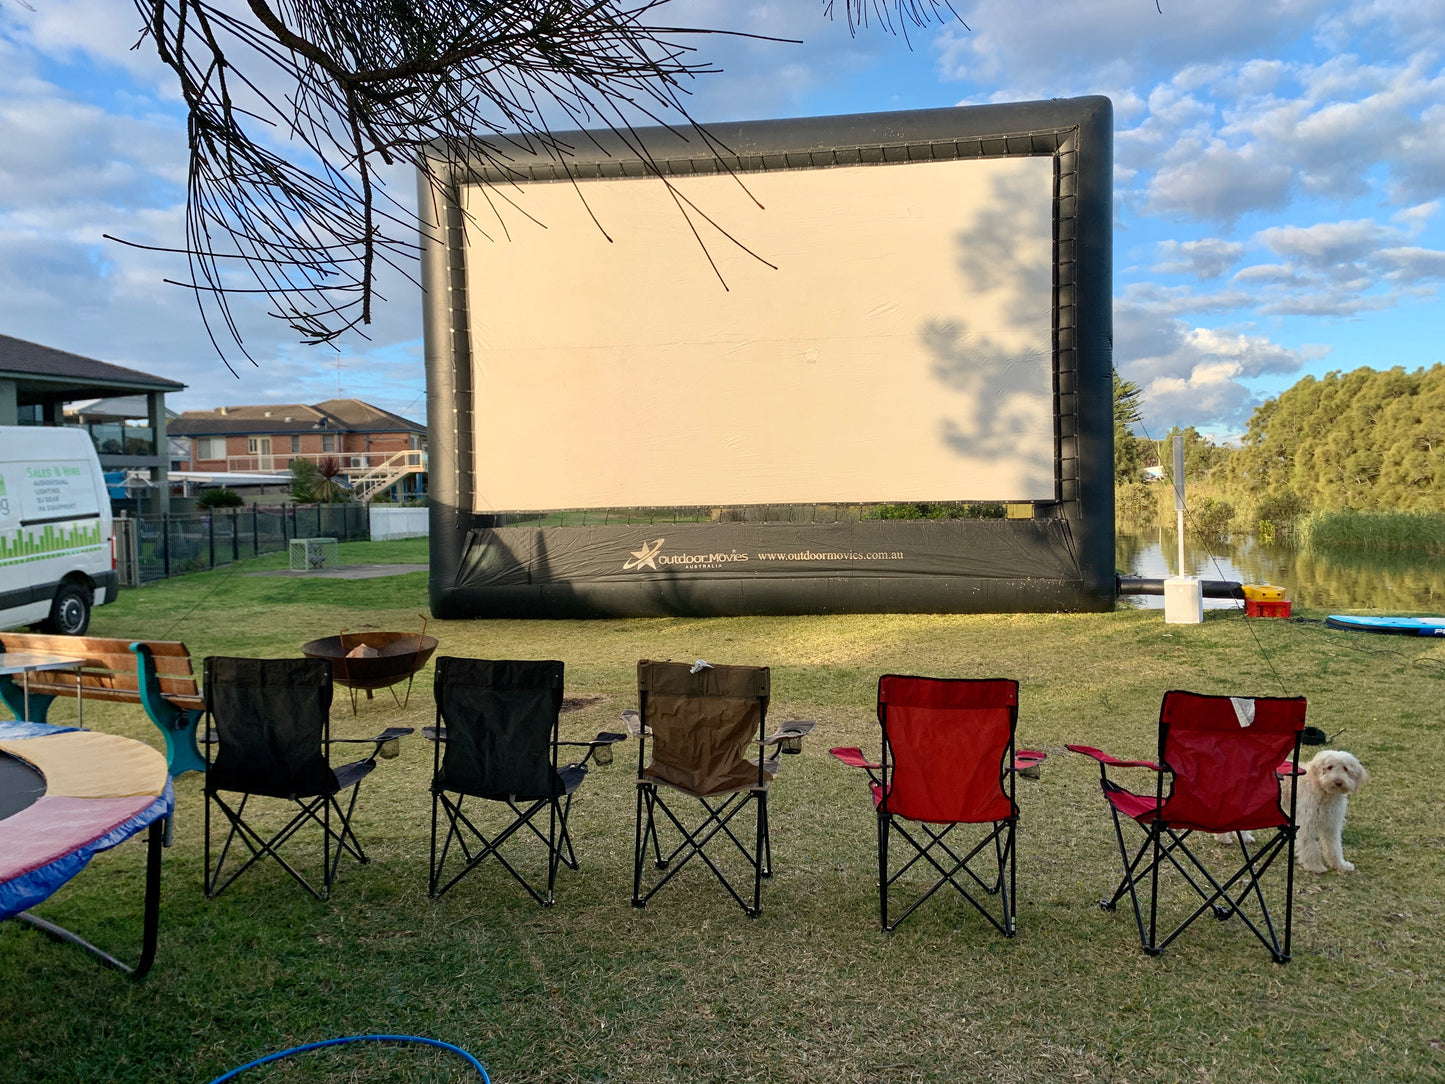 Hire - Giant inflatable Outdoor Cinema Movies Screen 10m x 3m